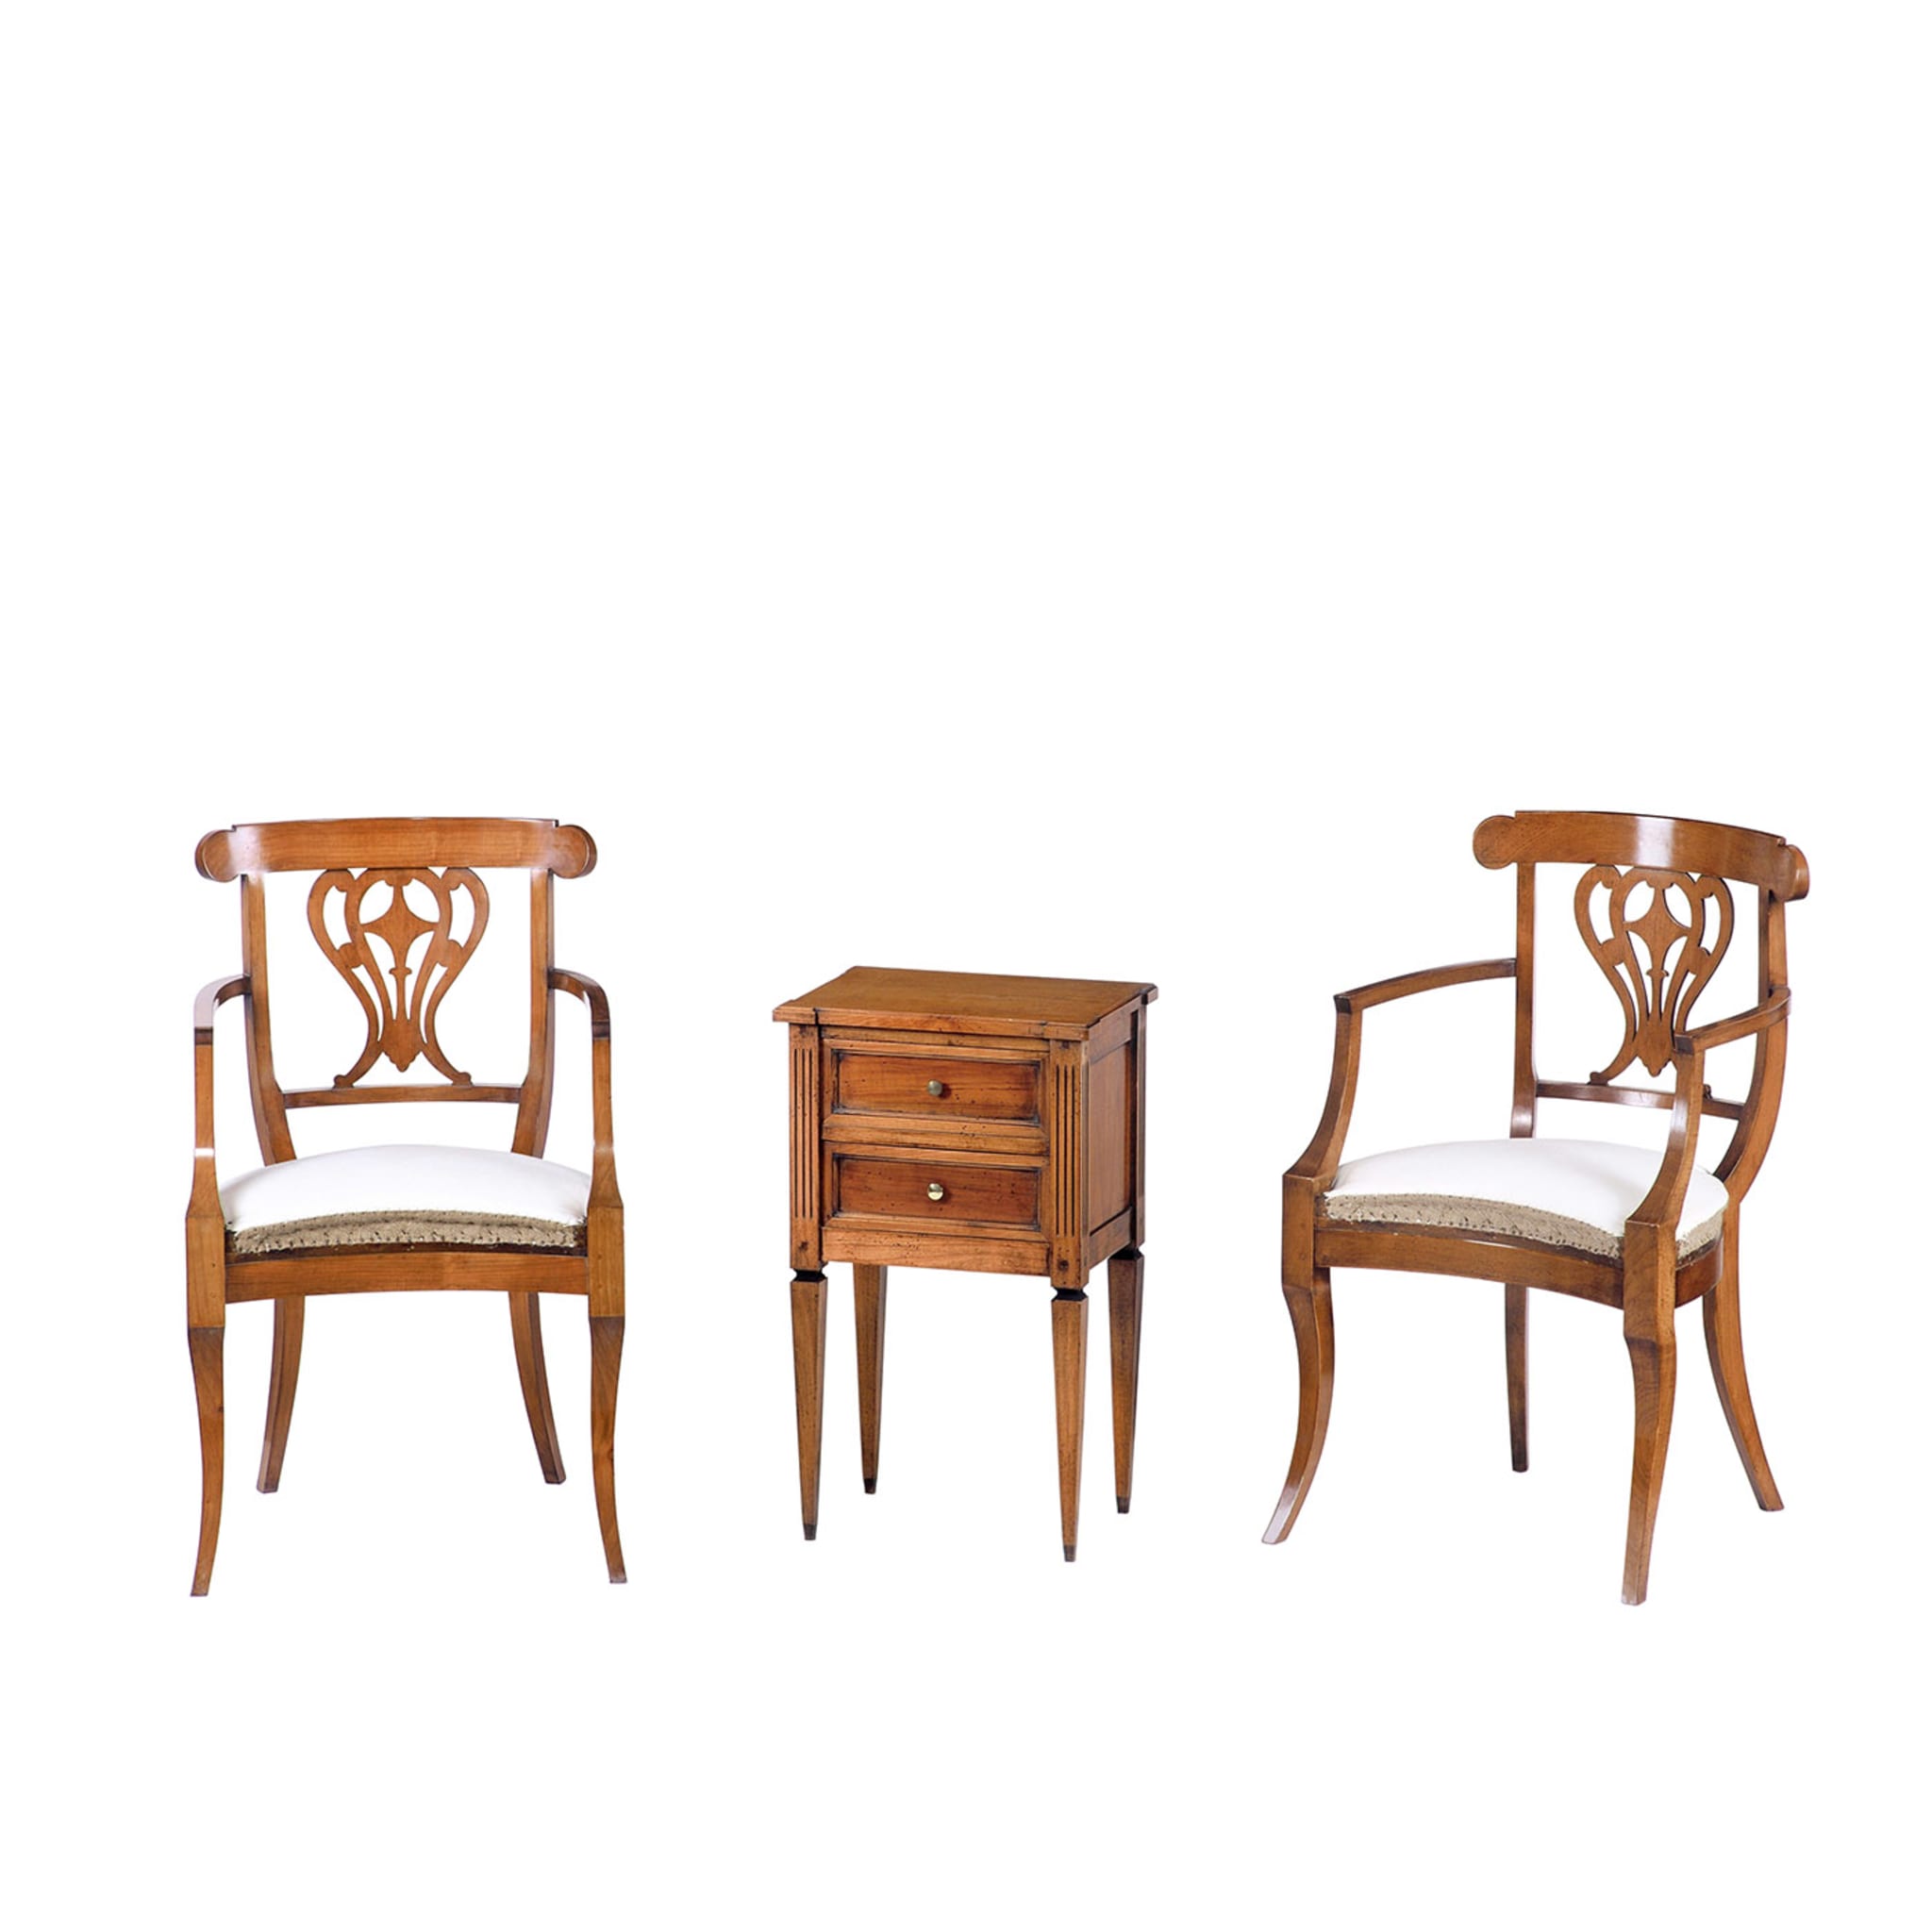 French Empire-Style Cherry Chair With Arms - Alternative view 1